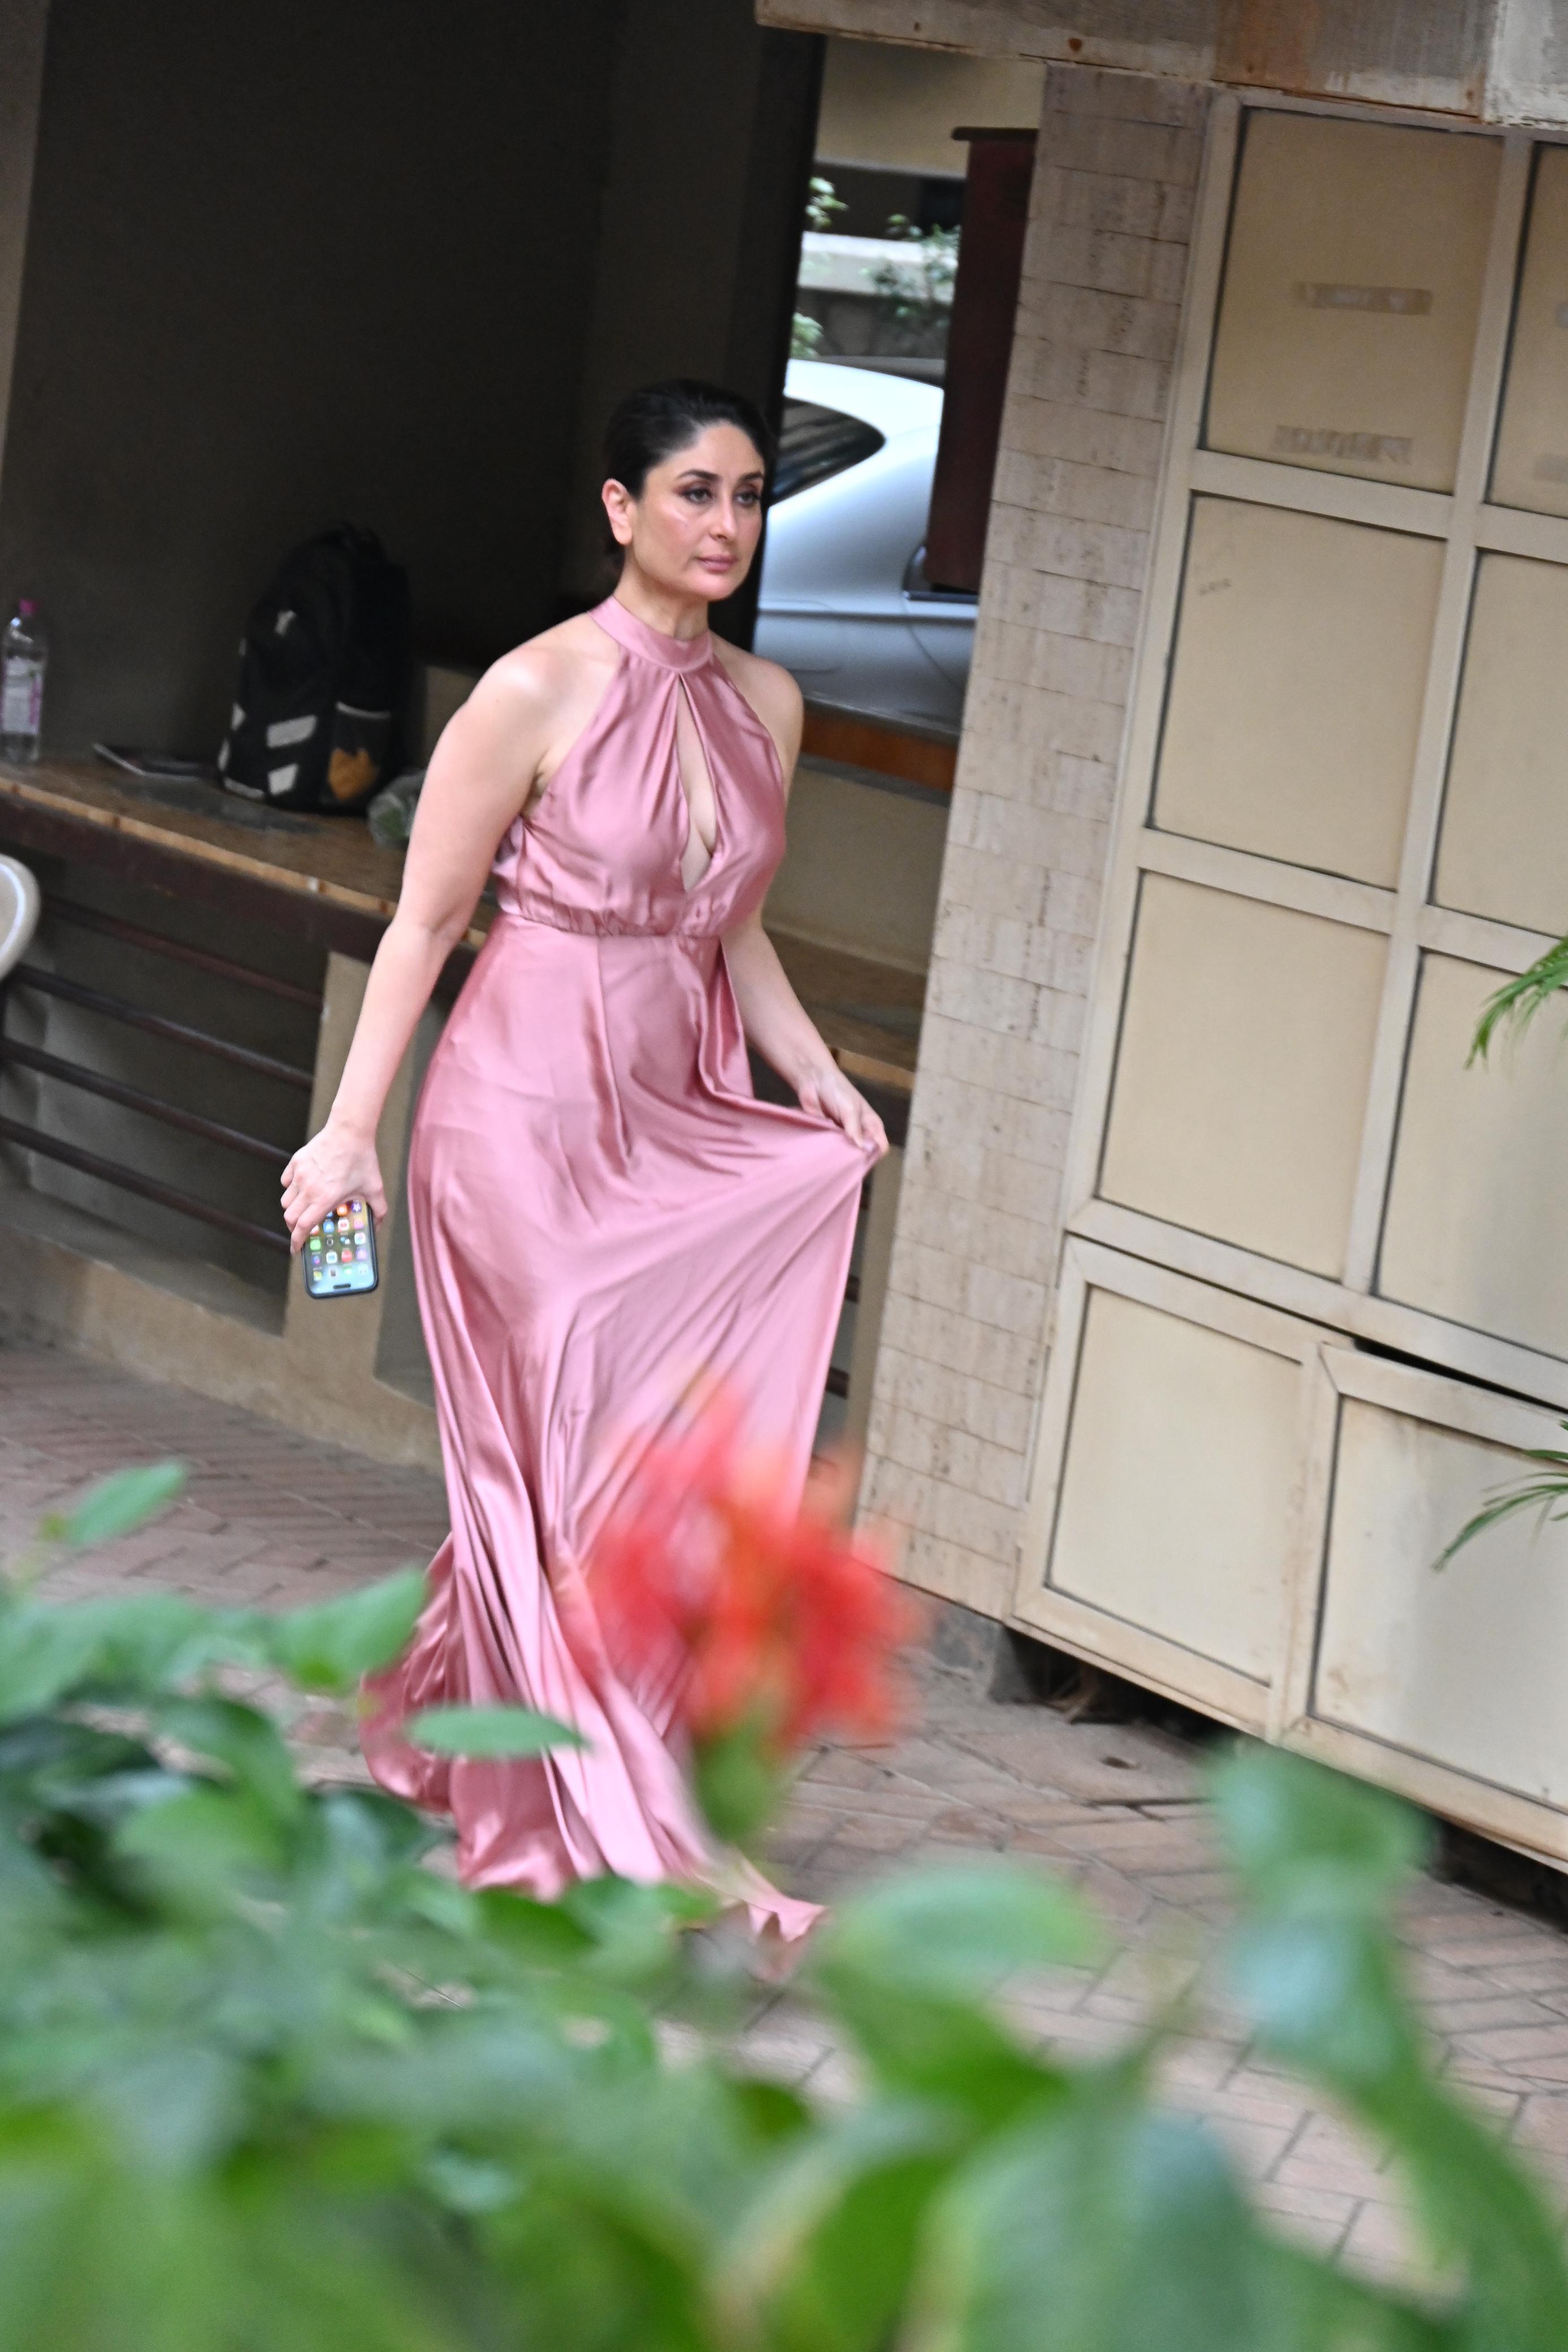 Kareena Kapoor looked stunning in a pink gown as she was snapped in the city